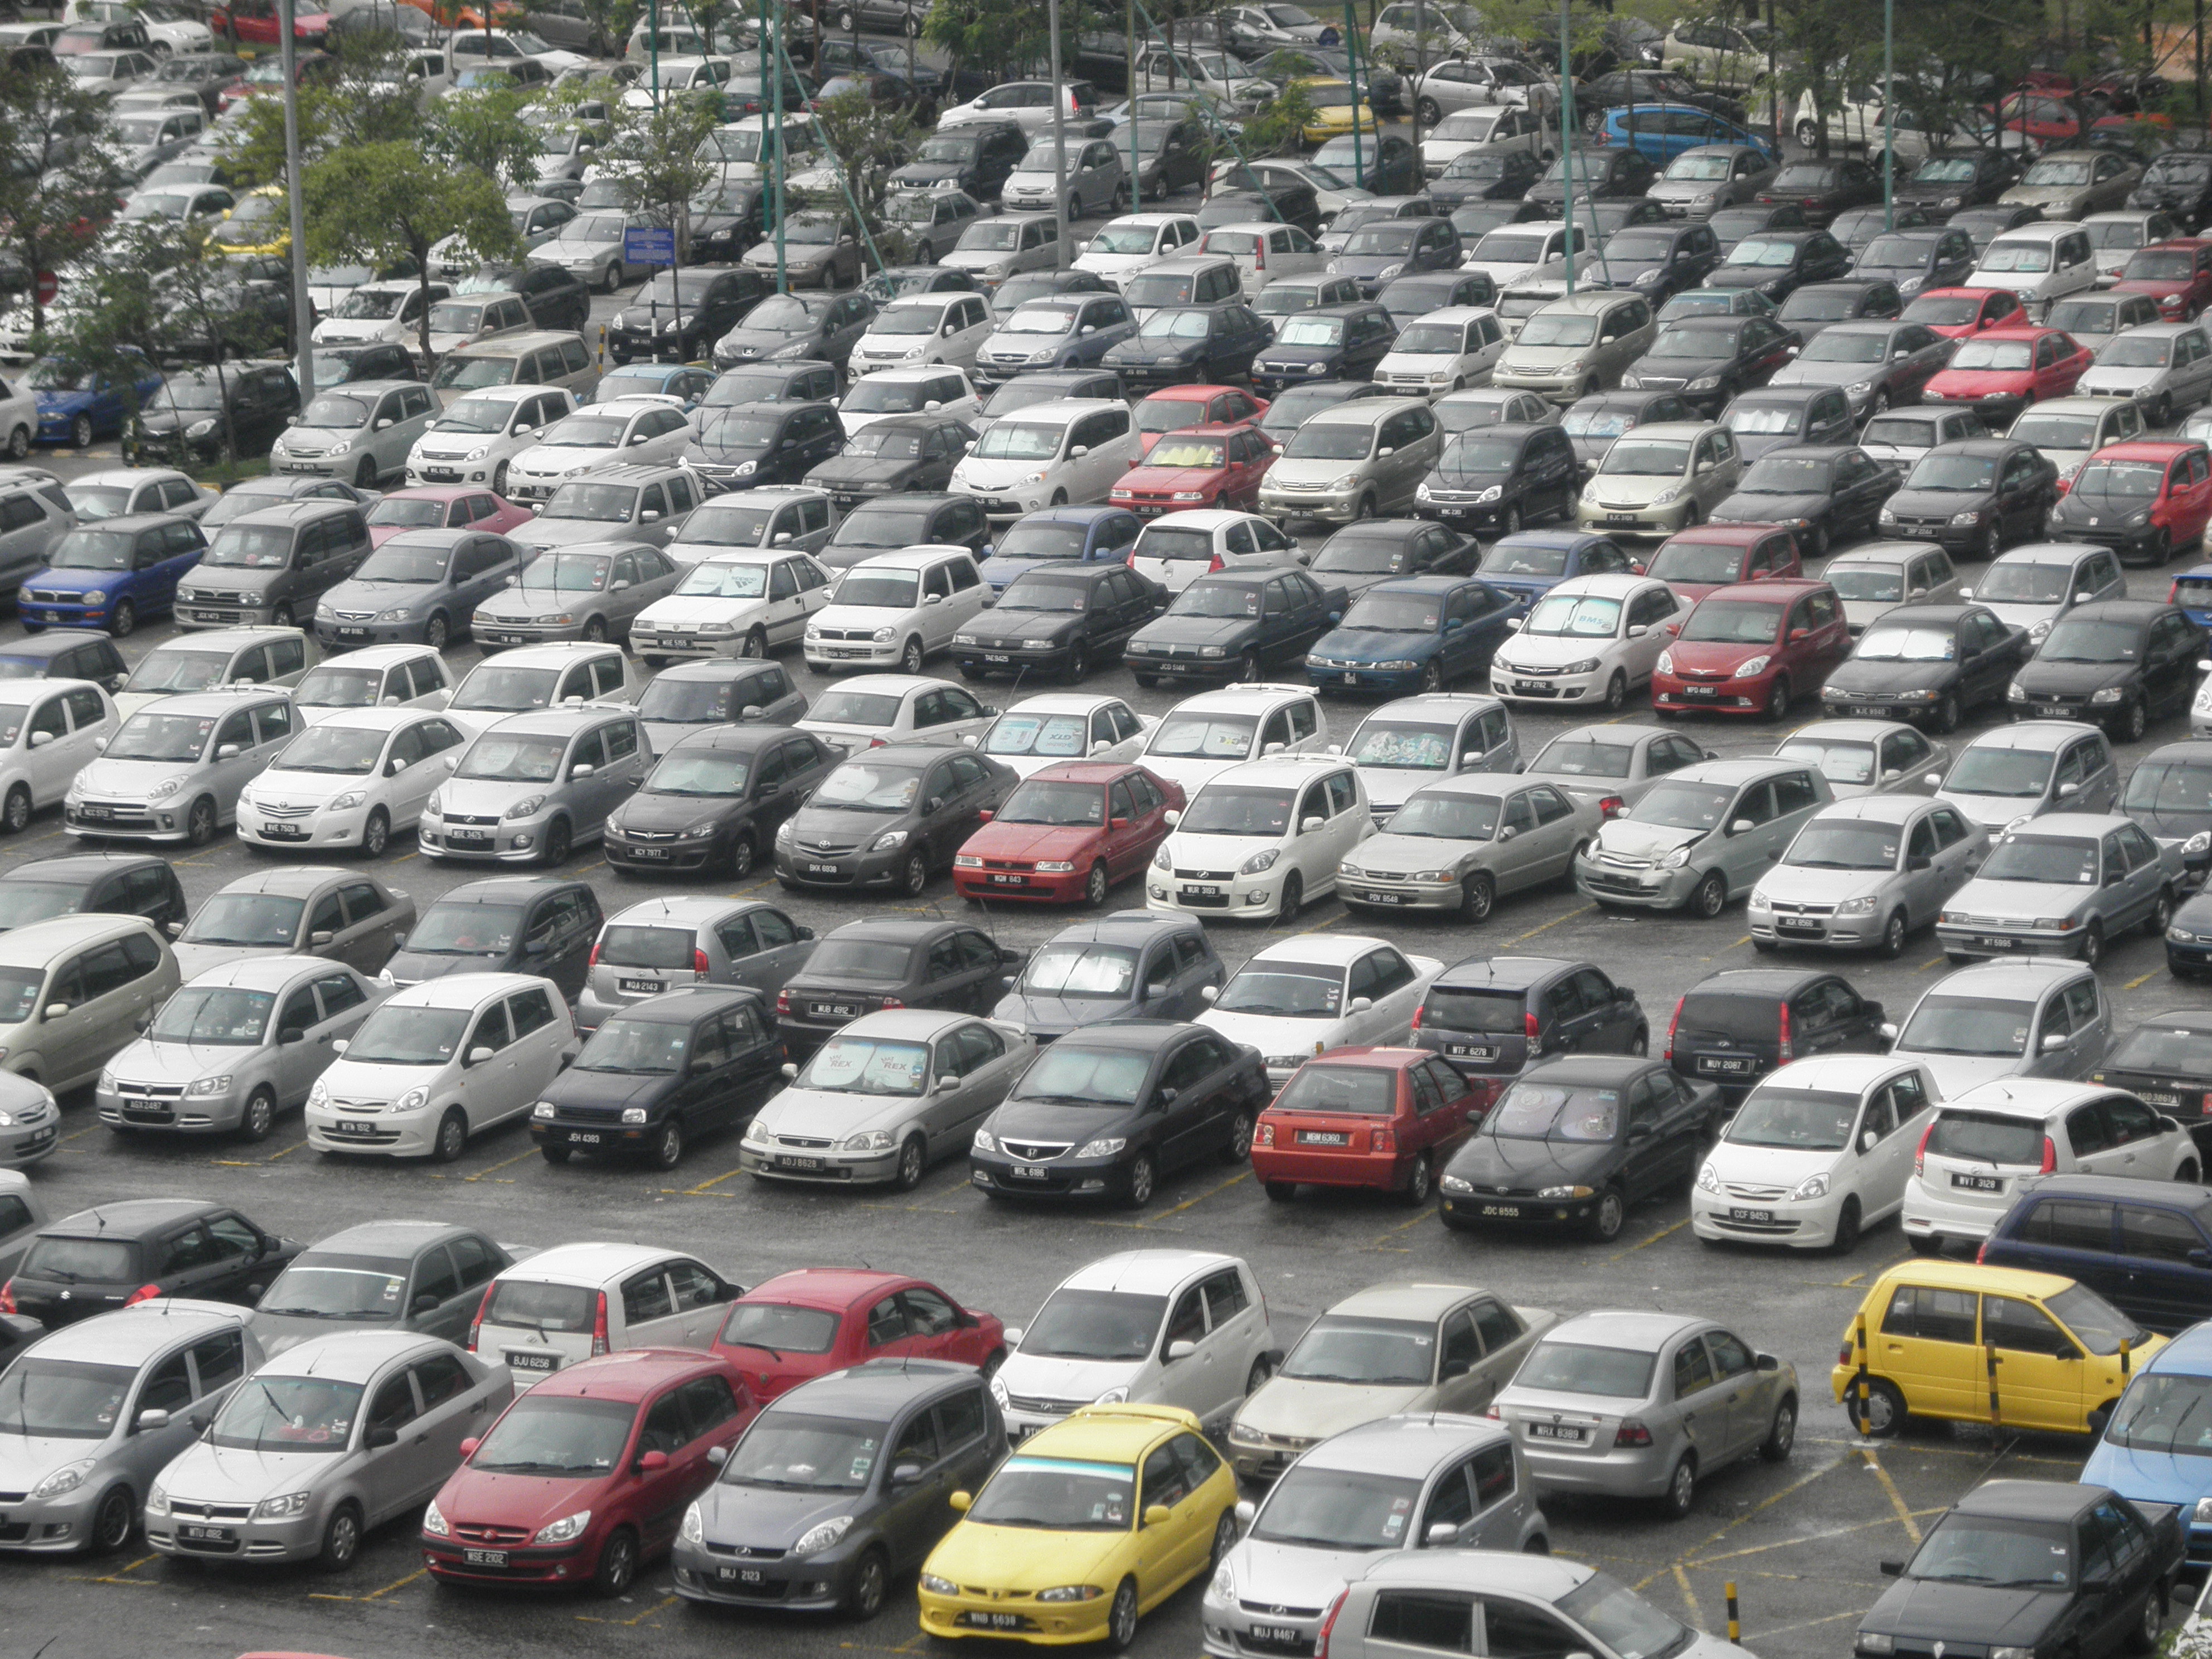 Why the cheapest spot in the car park might already be taken